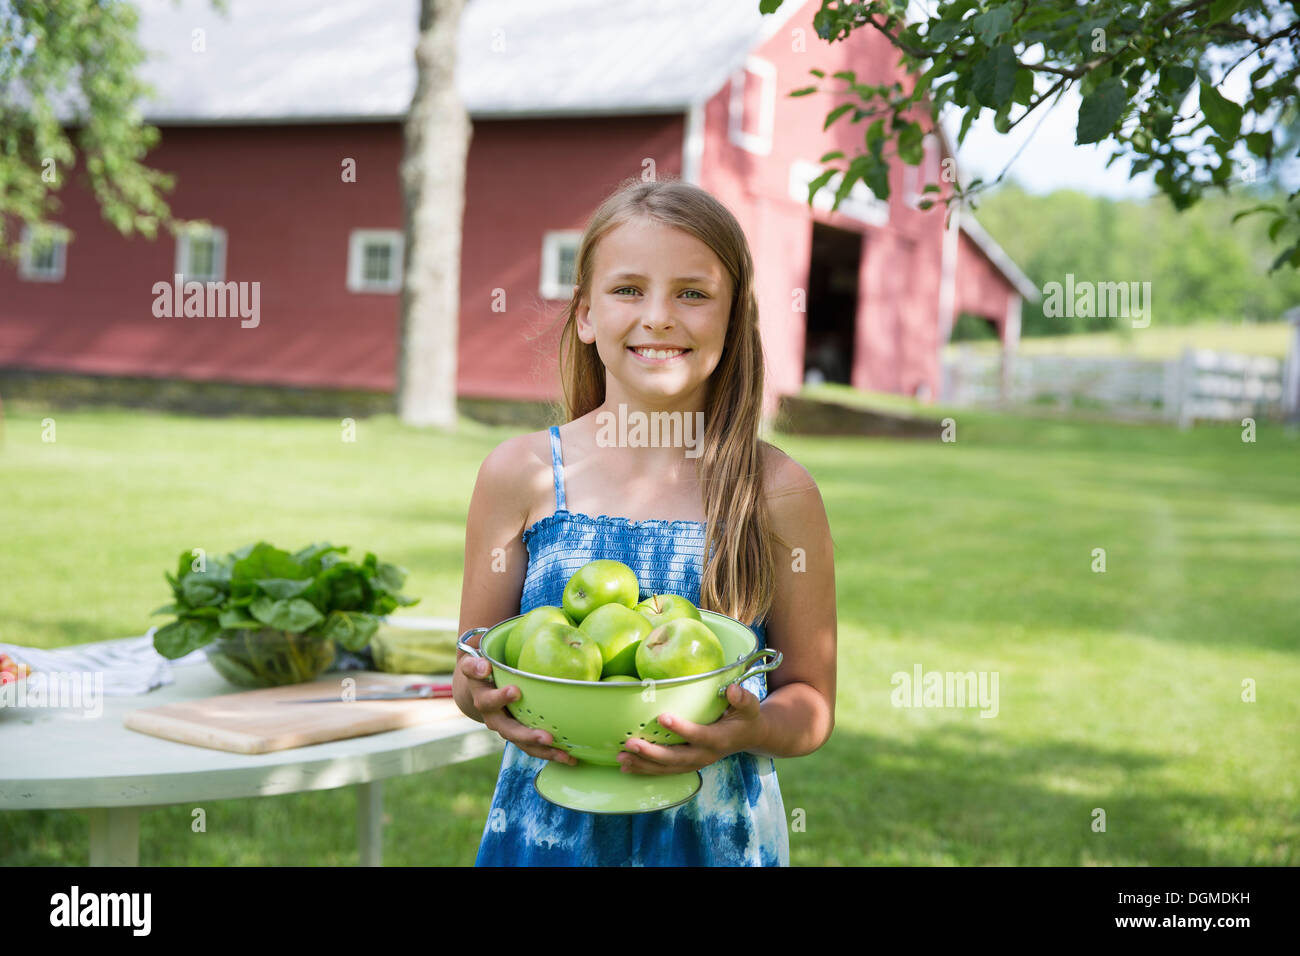 Family party. A young girl with long blonde hair wearing a blue sundress, carrying a large bowl of crisp green skinned apples. Stock Photo